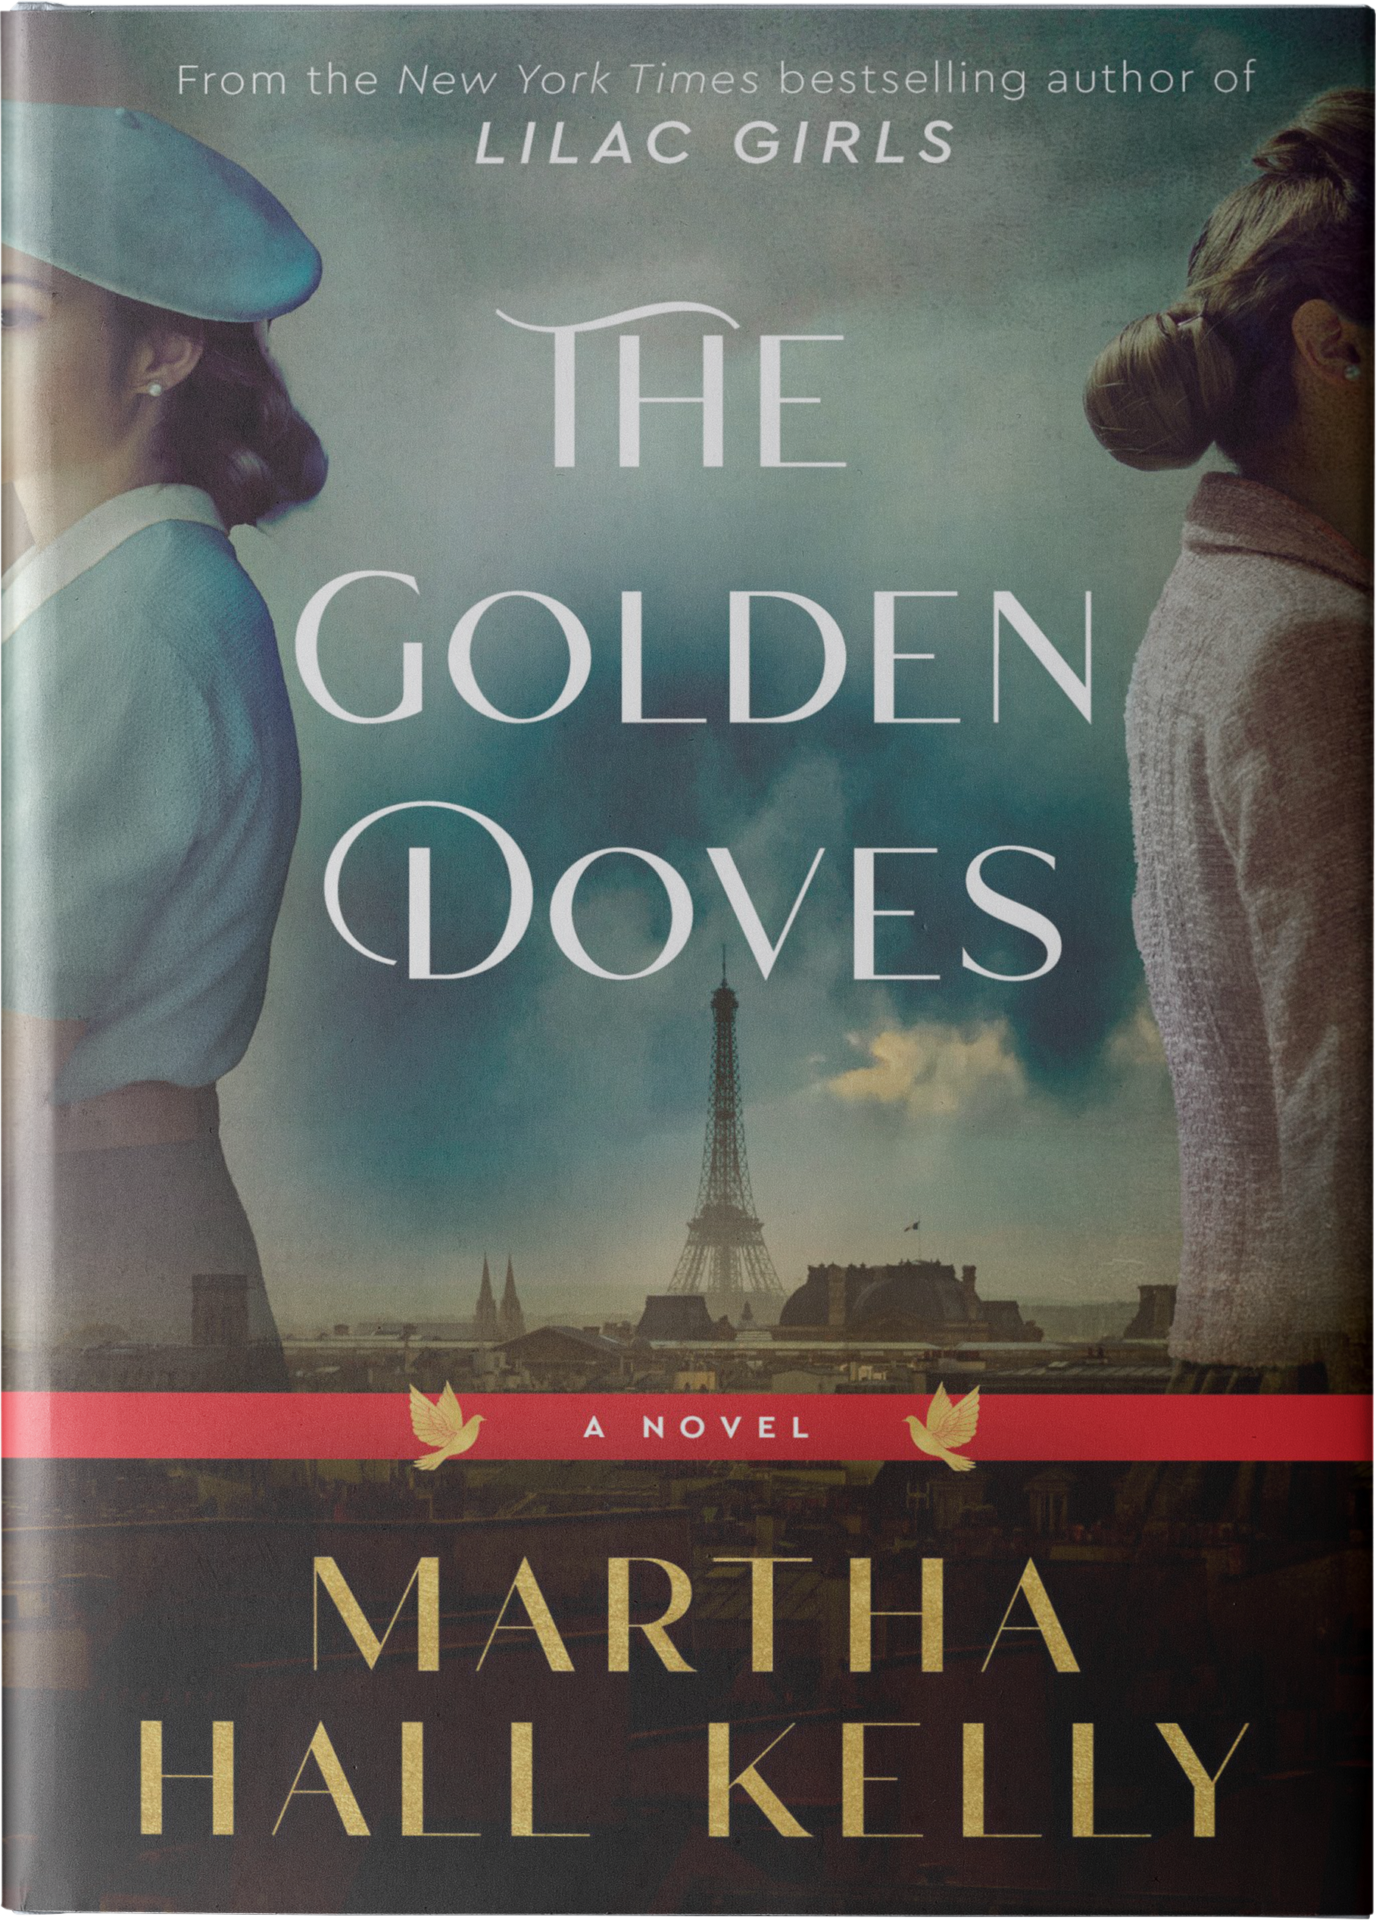 The Golden Doves by Martha Hall Kelly